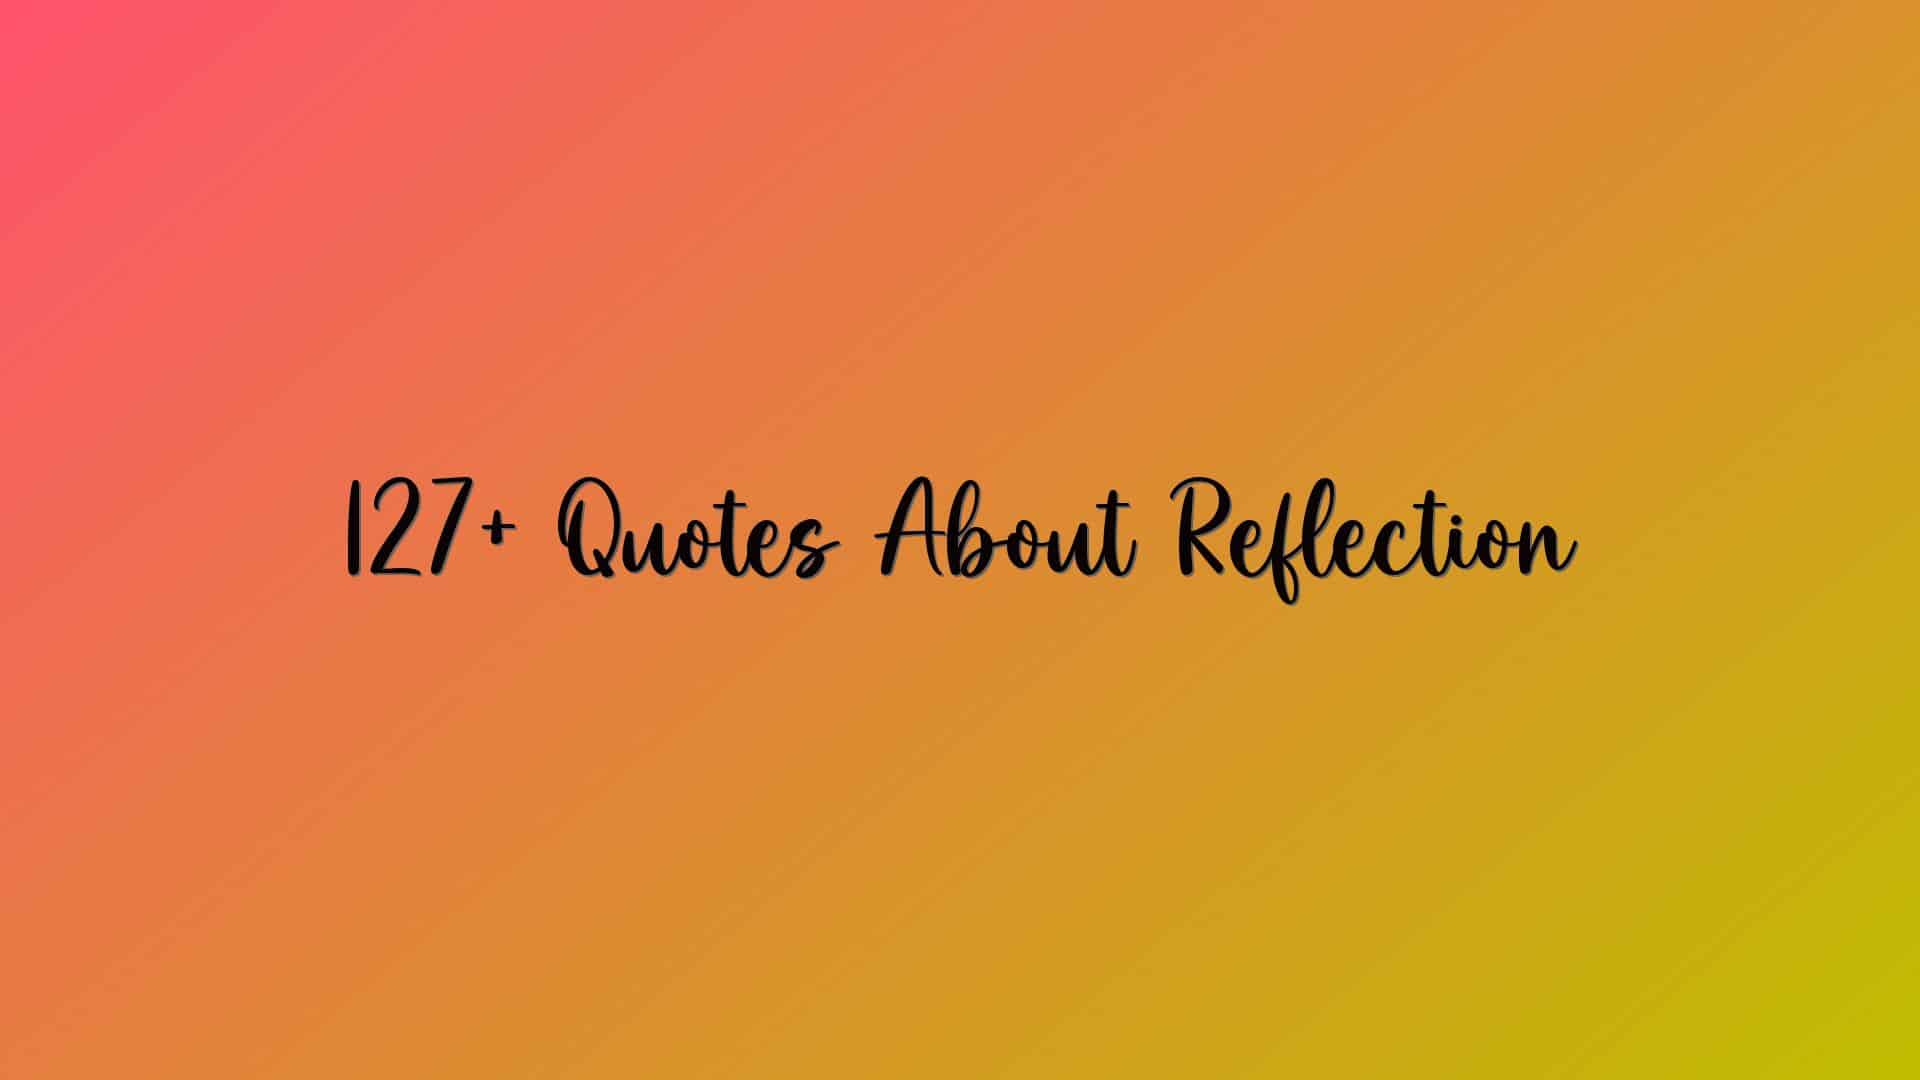 127+ Quotes About Reflection